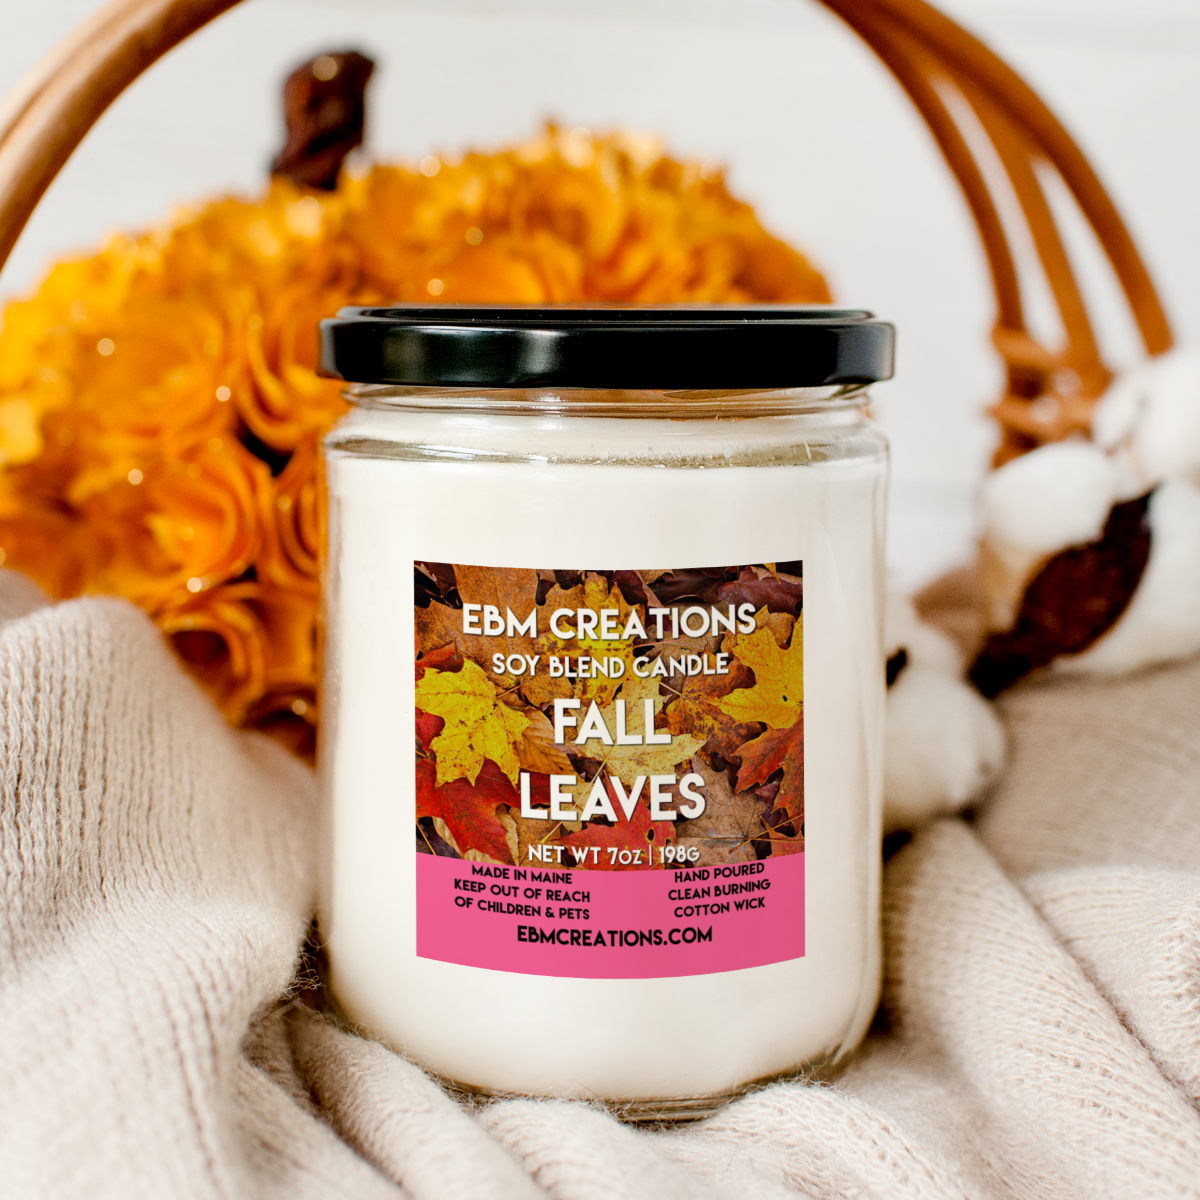 Fall Leaves - 7oz  Soy Blend Candle